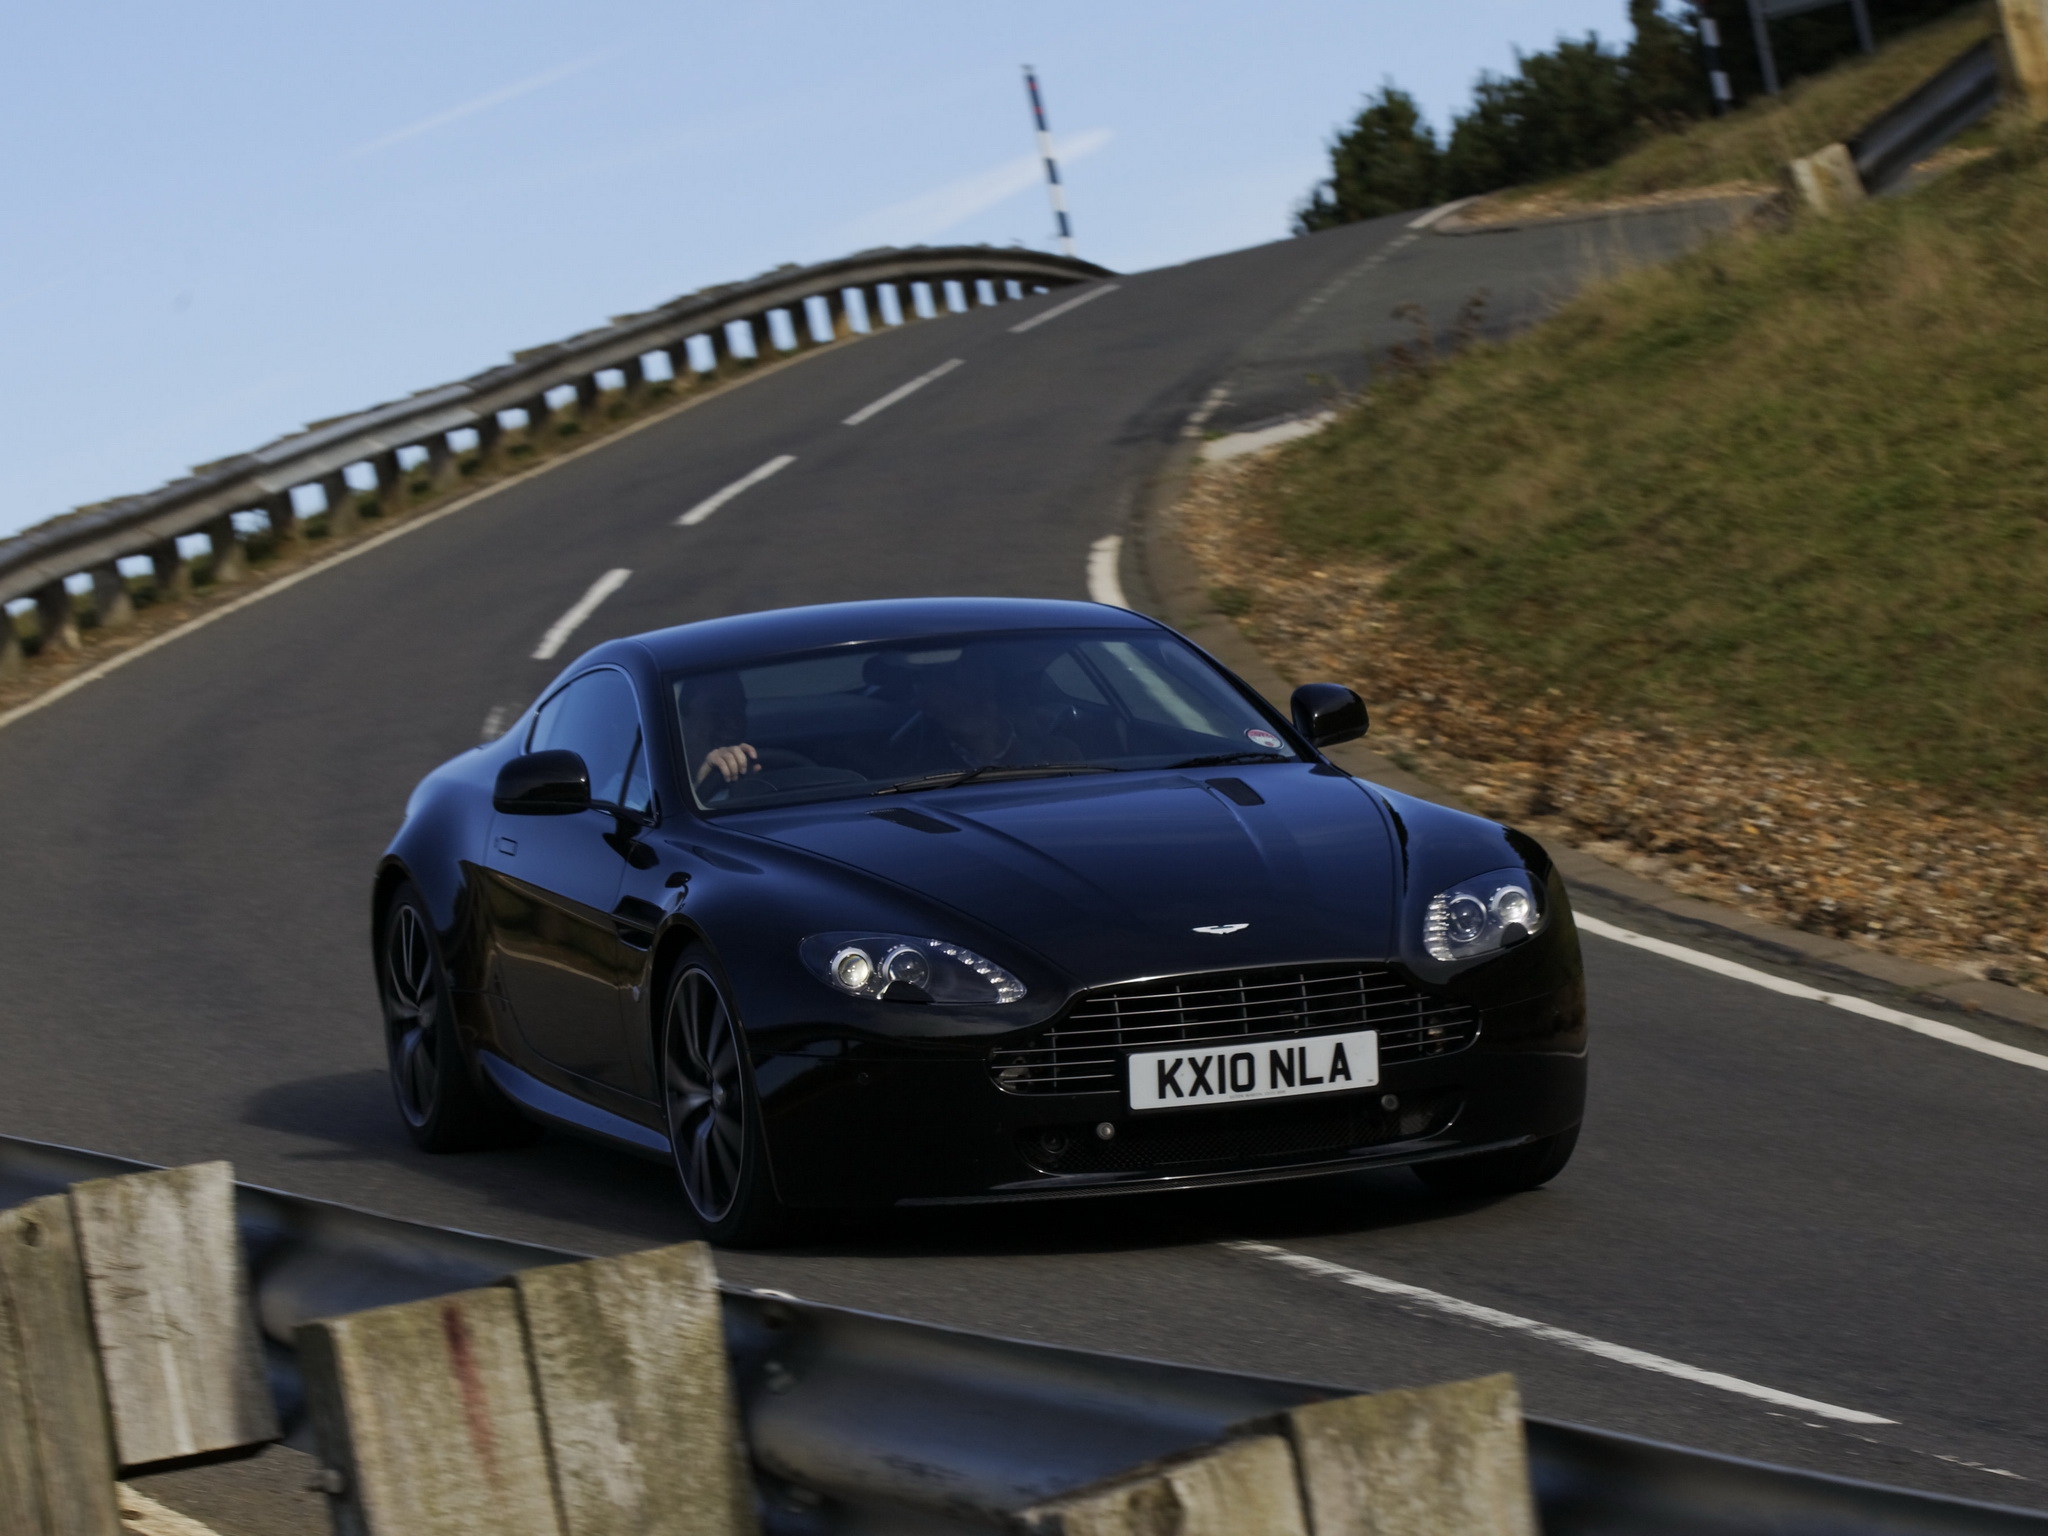 Windows Backgrounds aston martin, cars, black, front view, style, 2010, track, v8, route